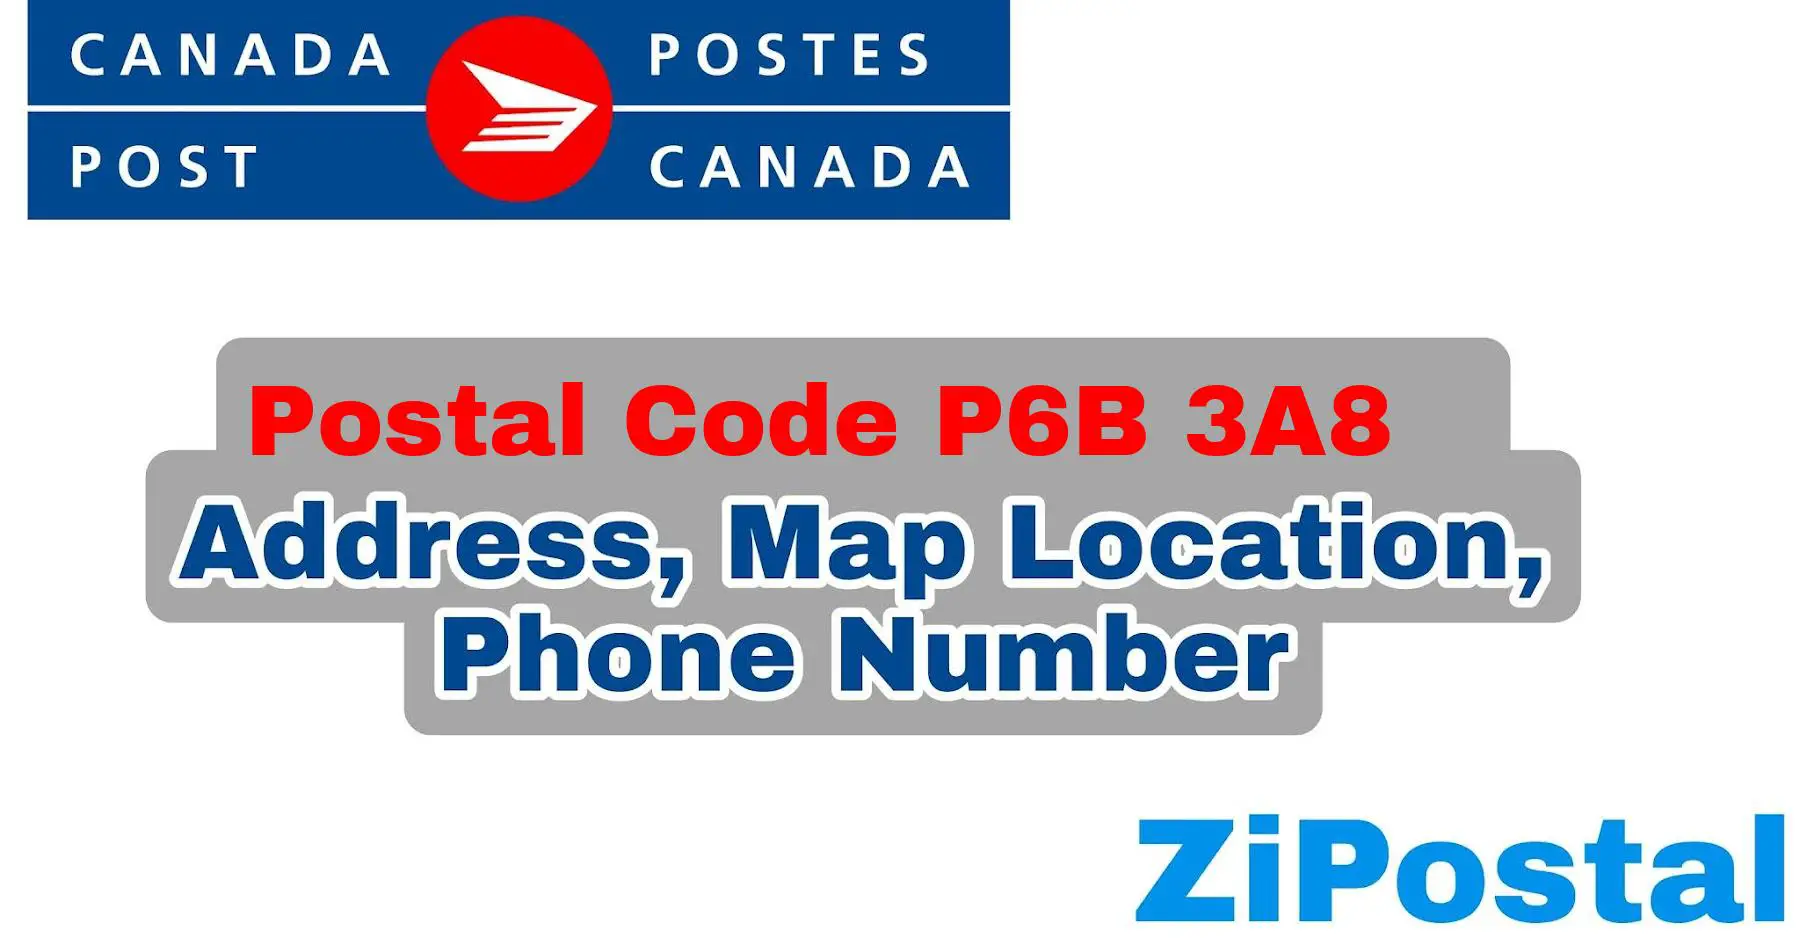 Postal Code P6B 3A8 Address Map Location and Phone Number